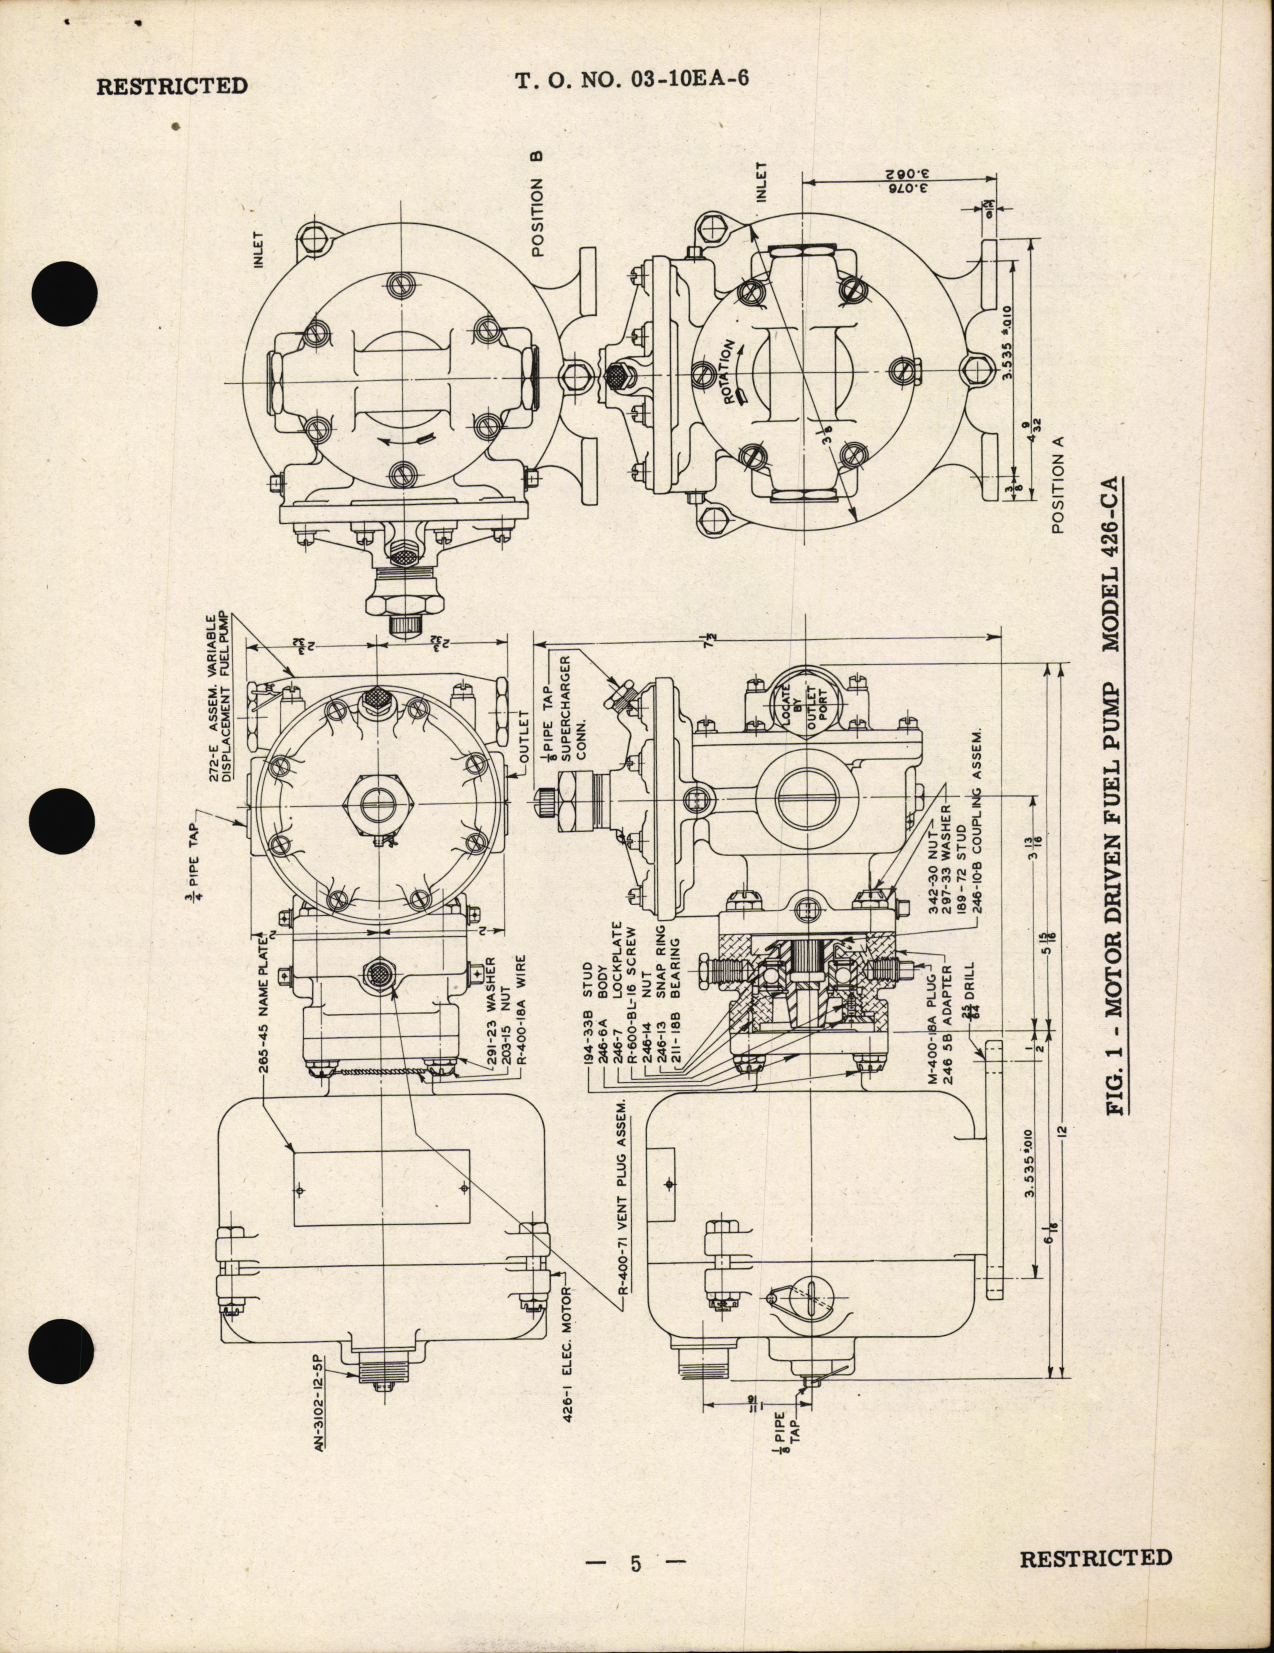 Sample page 7 from AirCorps Library document: Handbook of Instructions with Assembly Parts List for Motor Driven Fuel Pumps Model 426-CA